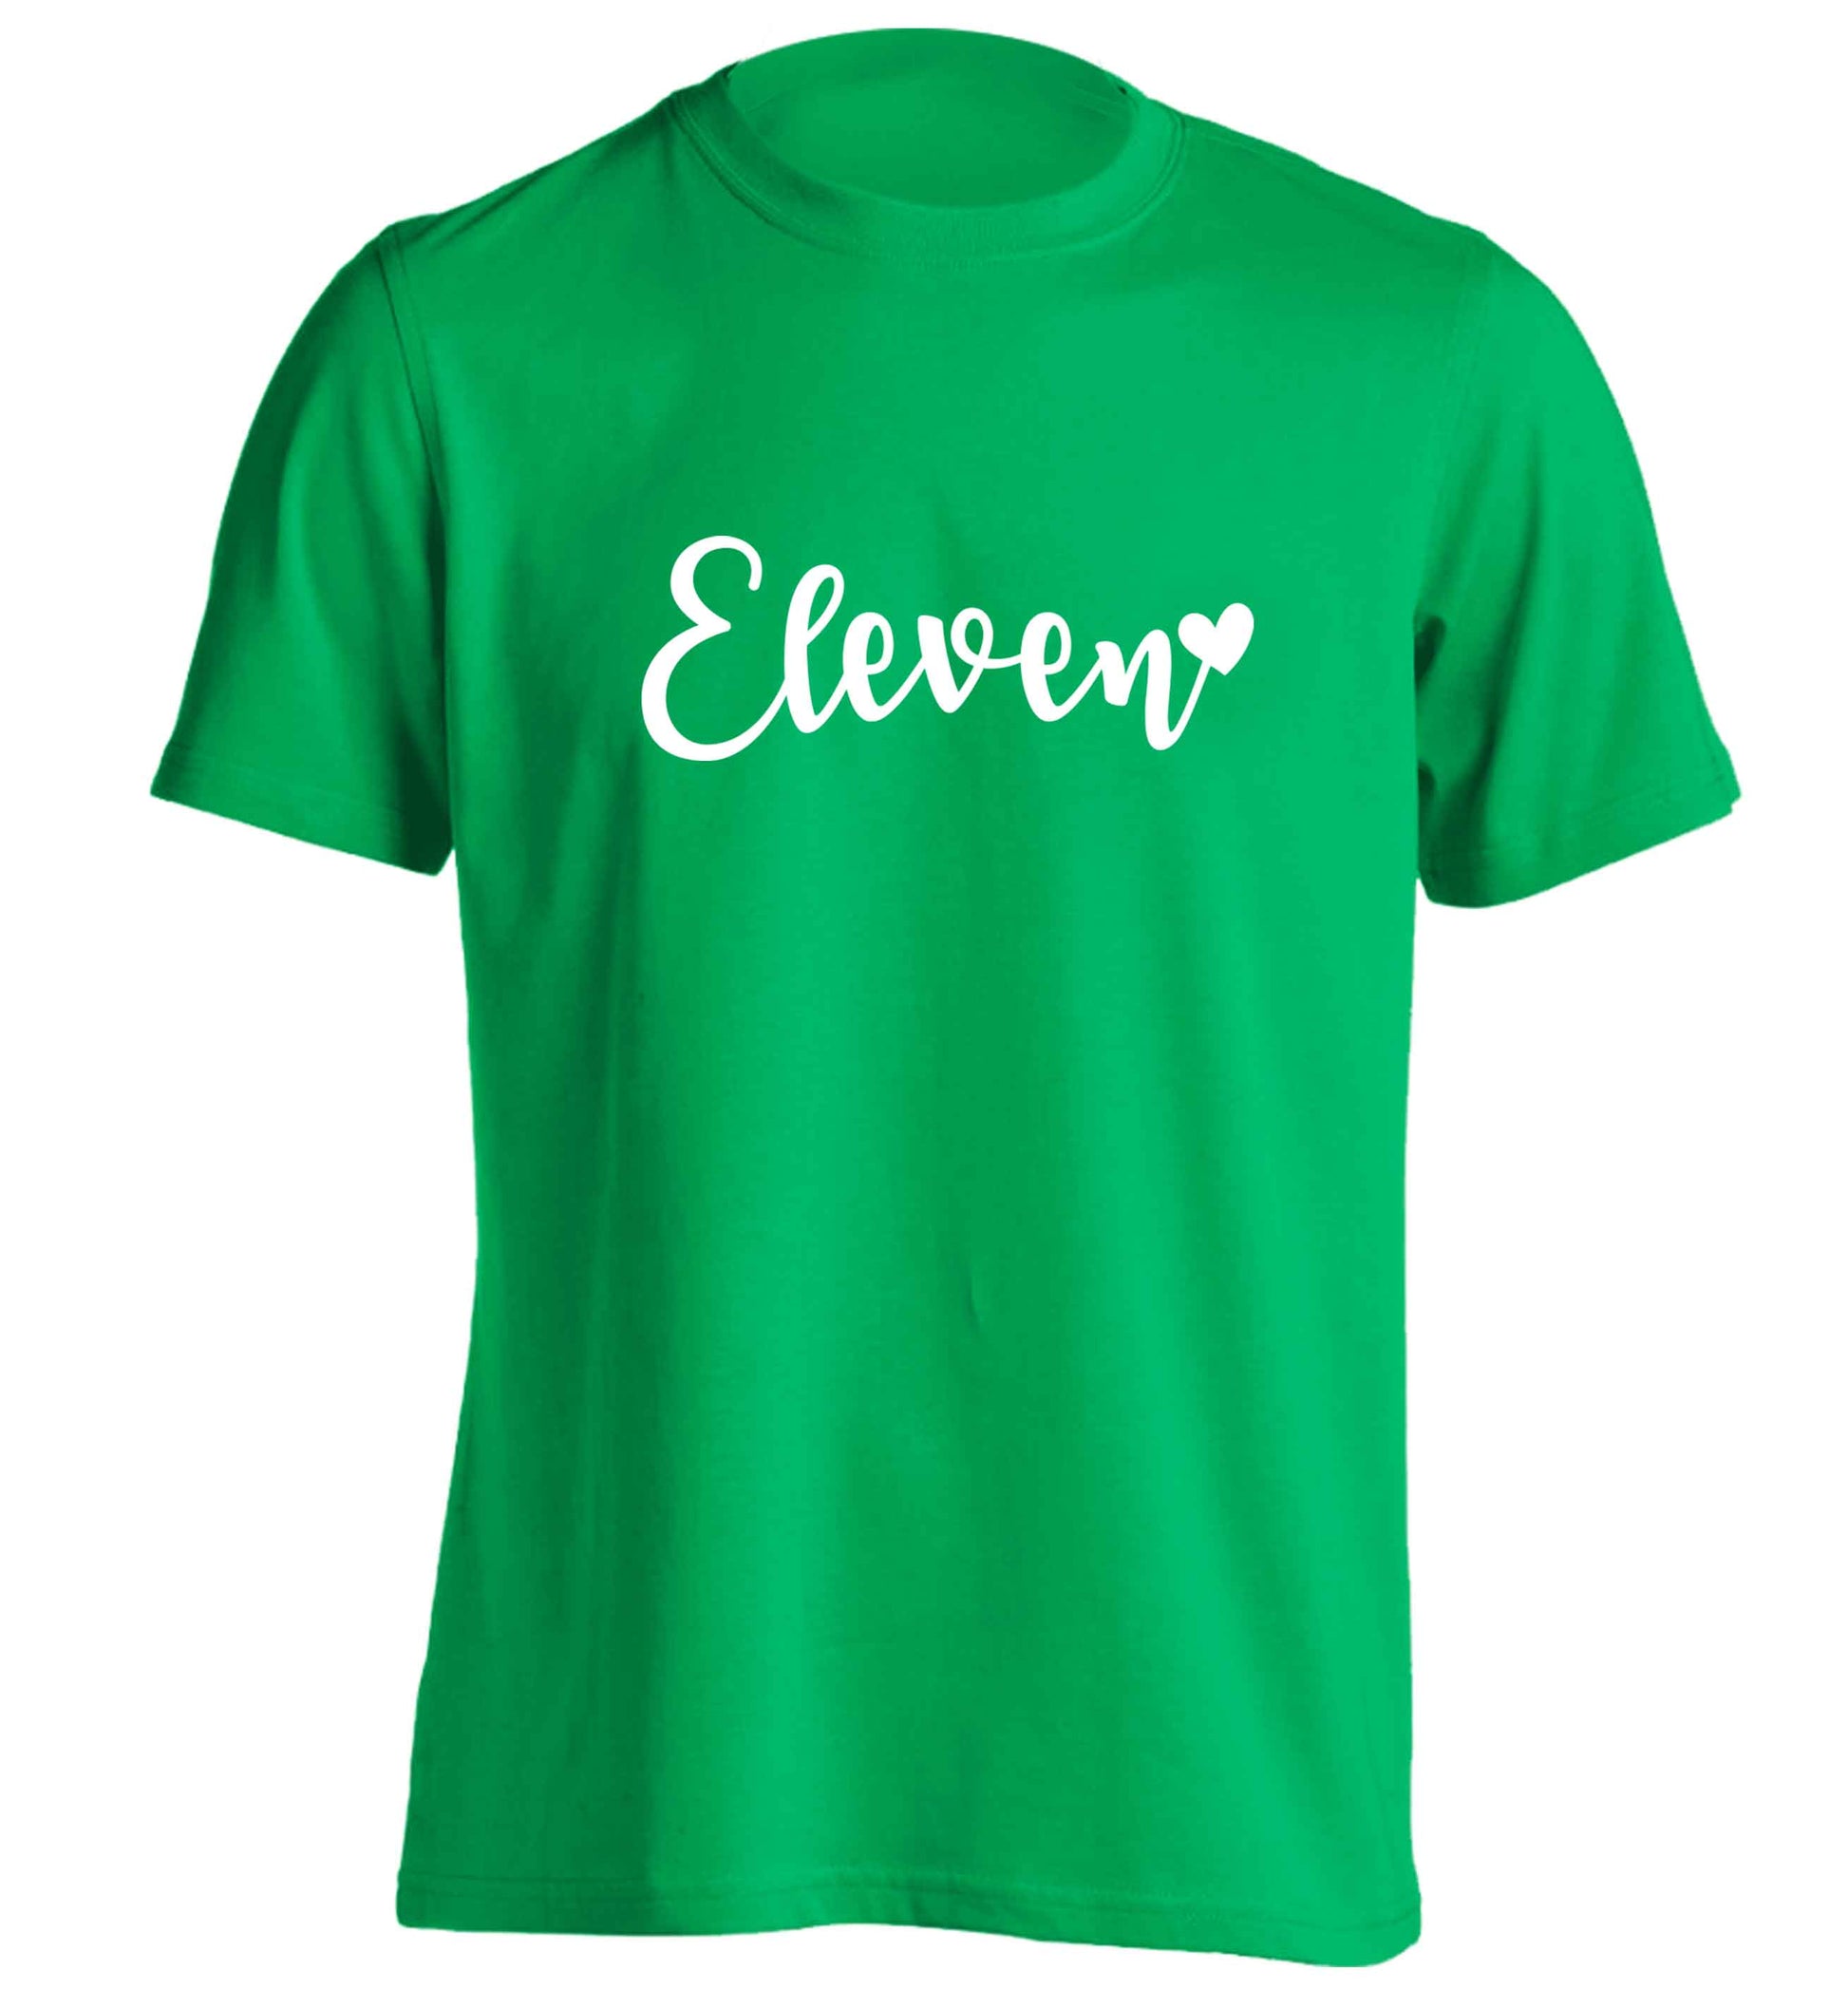 Eleven and heart! adults unisex green Tshirt 2XL